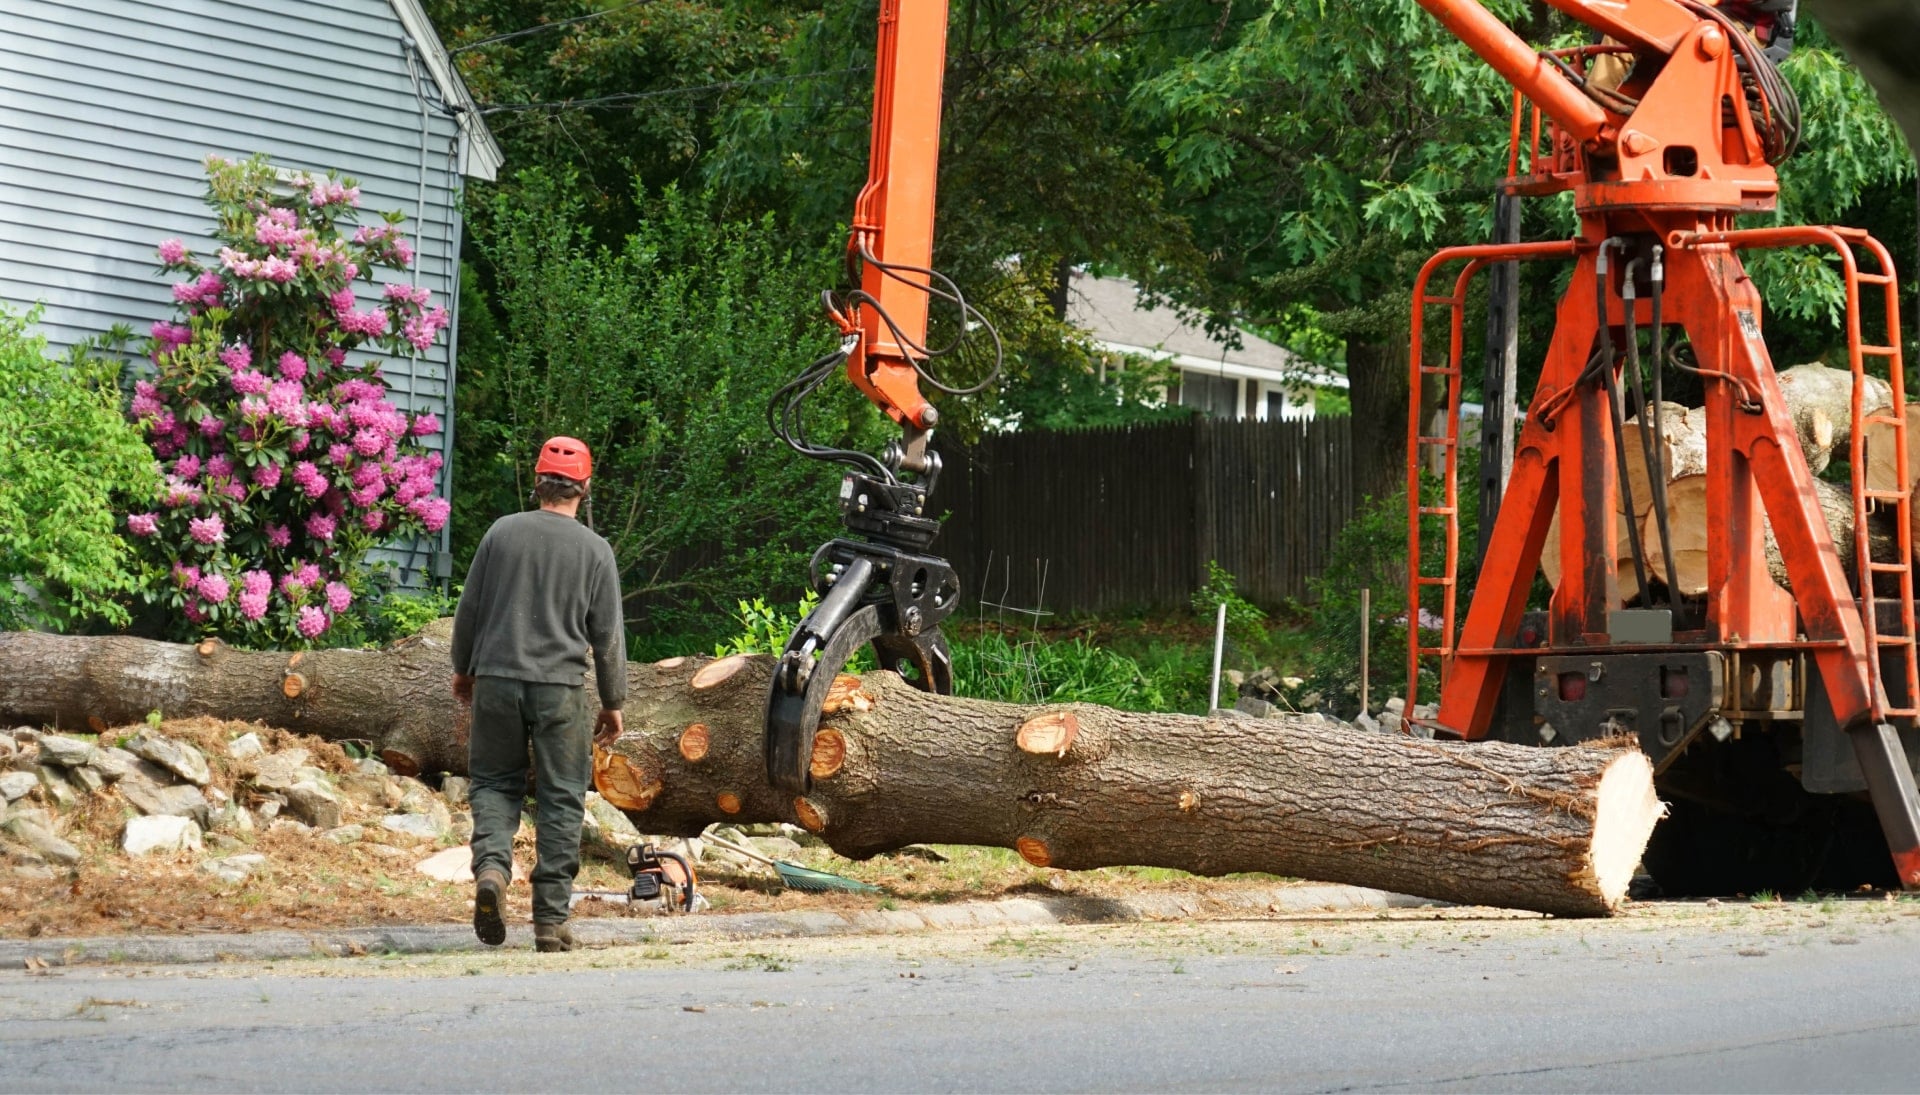 Local partner for Tree removal services in Peachtree City